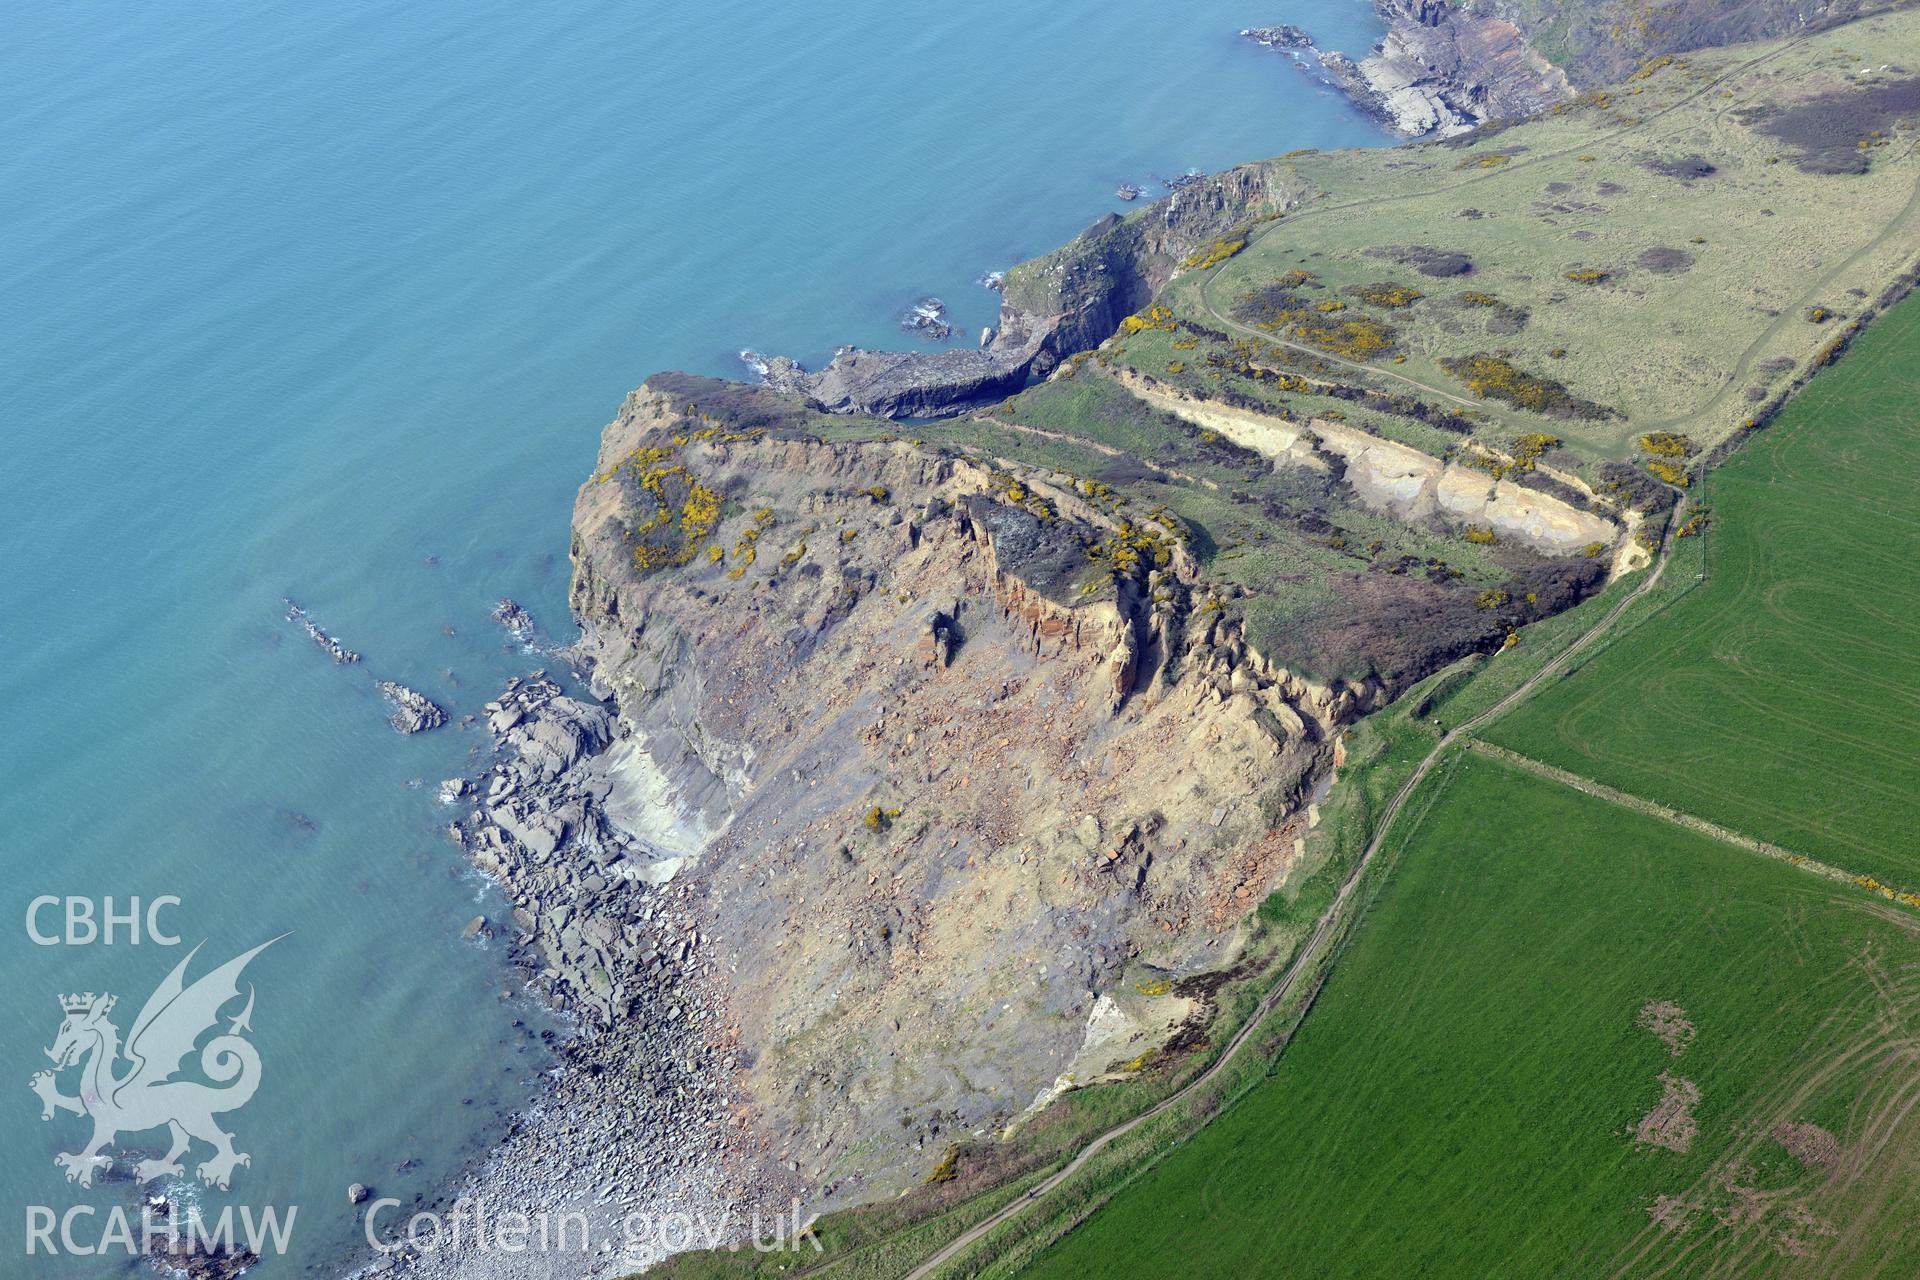 Aerial photography of Black Point Rath taken on 27th March 2017 for structure from motion monitoring. Baseline aerial reconnaissance survey for the CHERISH Project. ? Crown: CHERISH PROJECT 2017. Produced with EU funds through the Ireland Wales Co-operation Programme 2014-2020. All material made freely available through the Open Government Licence.